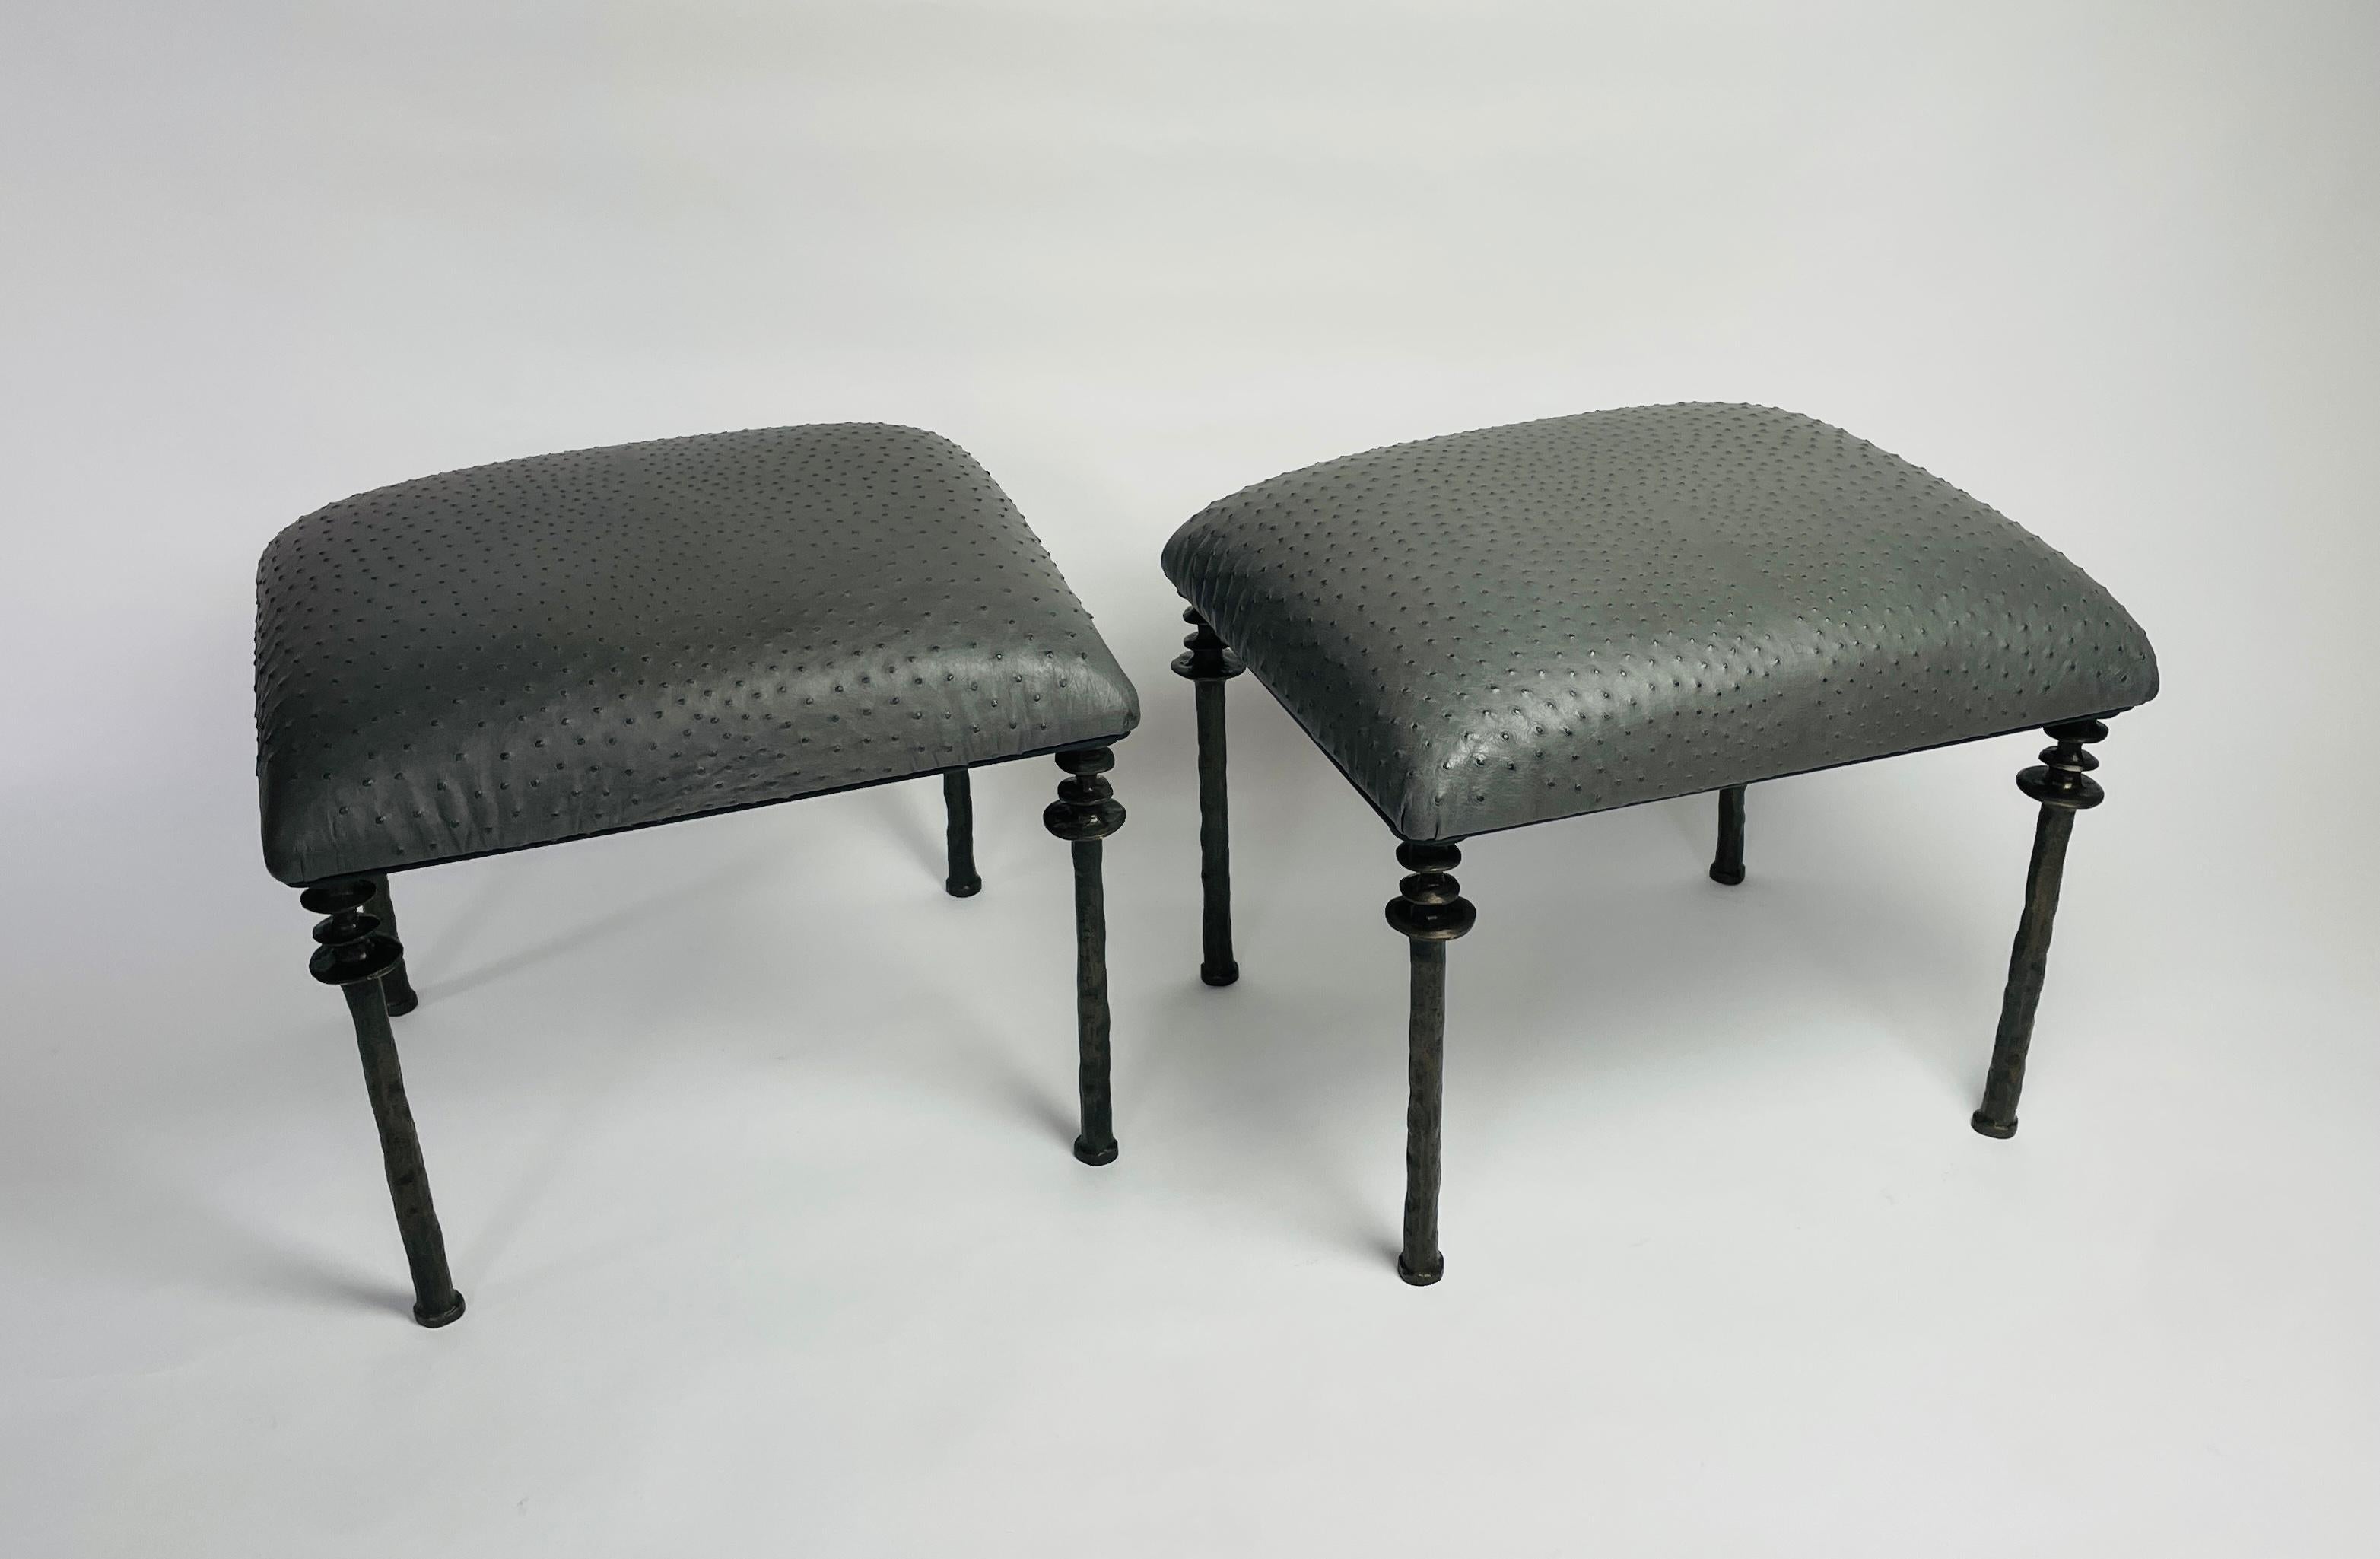 Two beautiful stools inspired by Diego Giacometti, these stools are ideal for those who are looking for unique seating. Their cast bronze legs provide a truly organic touch. The seat cushion has been upholstered in an anthracite farmed ostrich